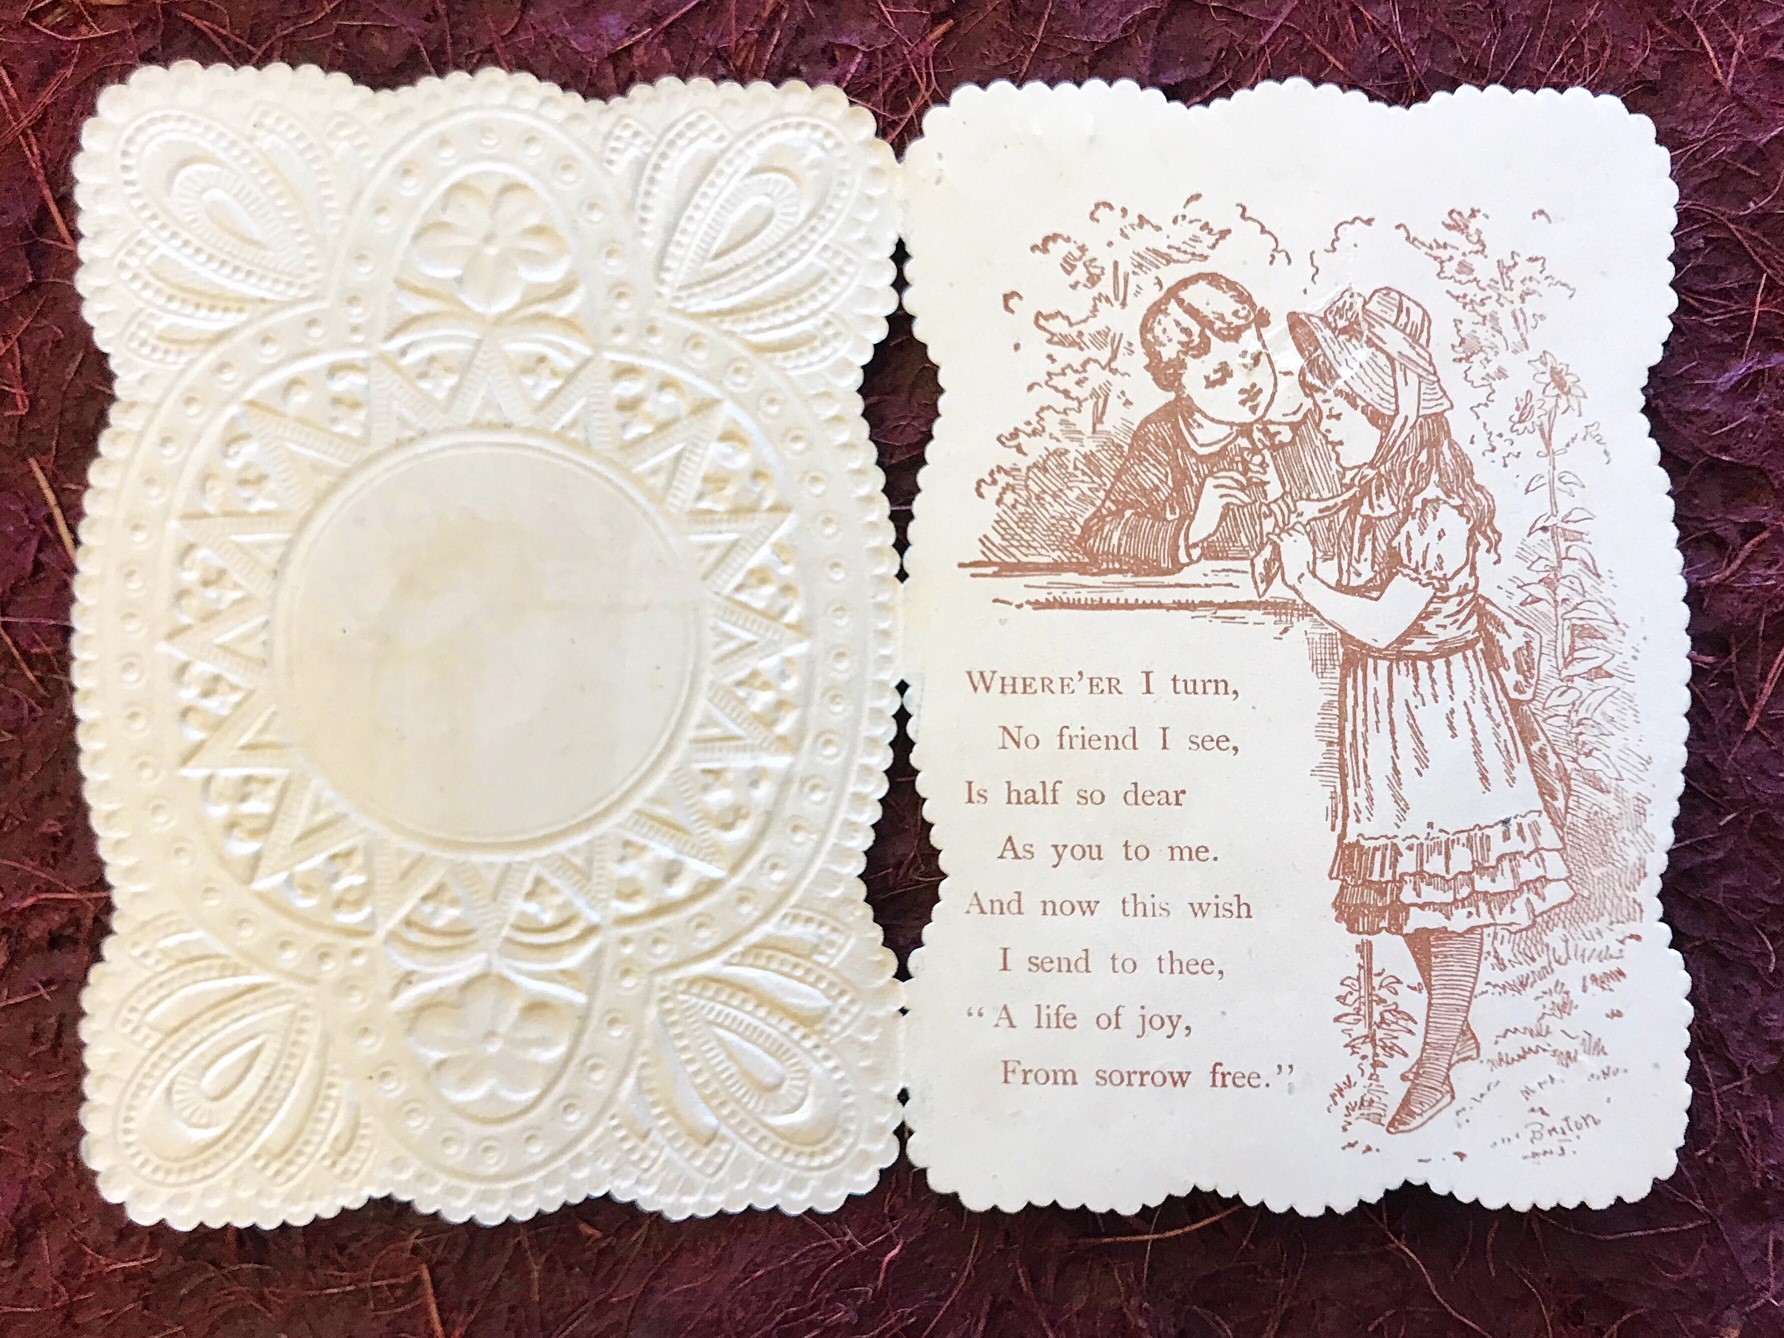 paper lace valentines with drawing of a boy and girl with a poem